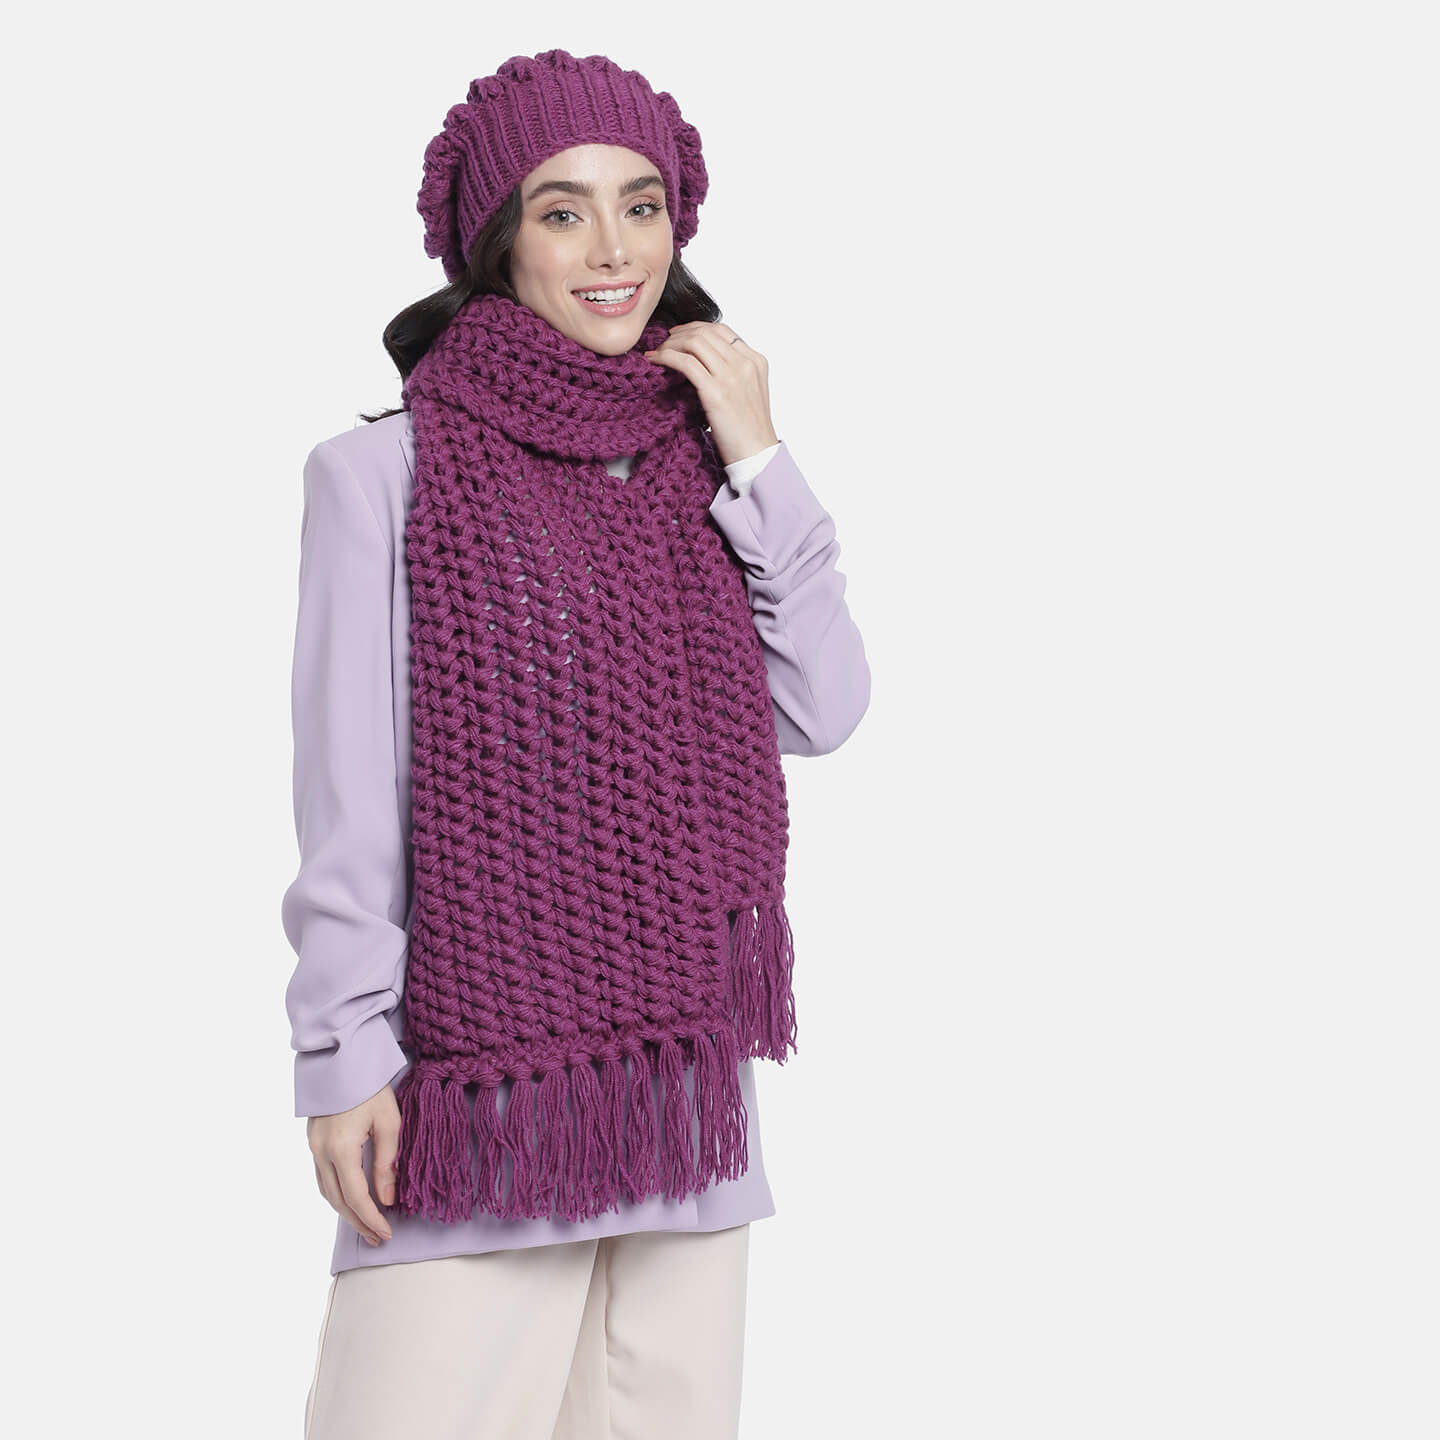 Beanie and Scarf Coordinating Set - 3185